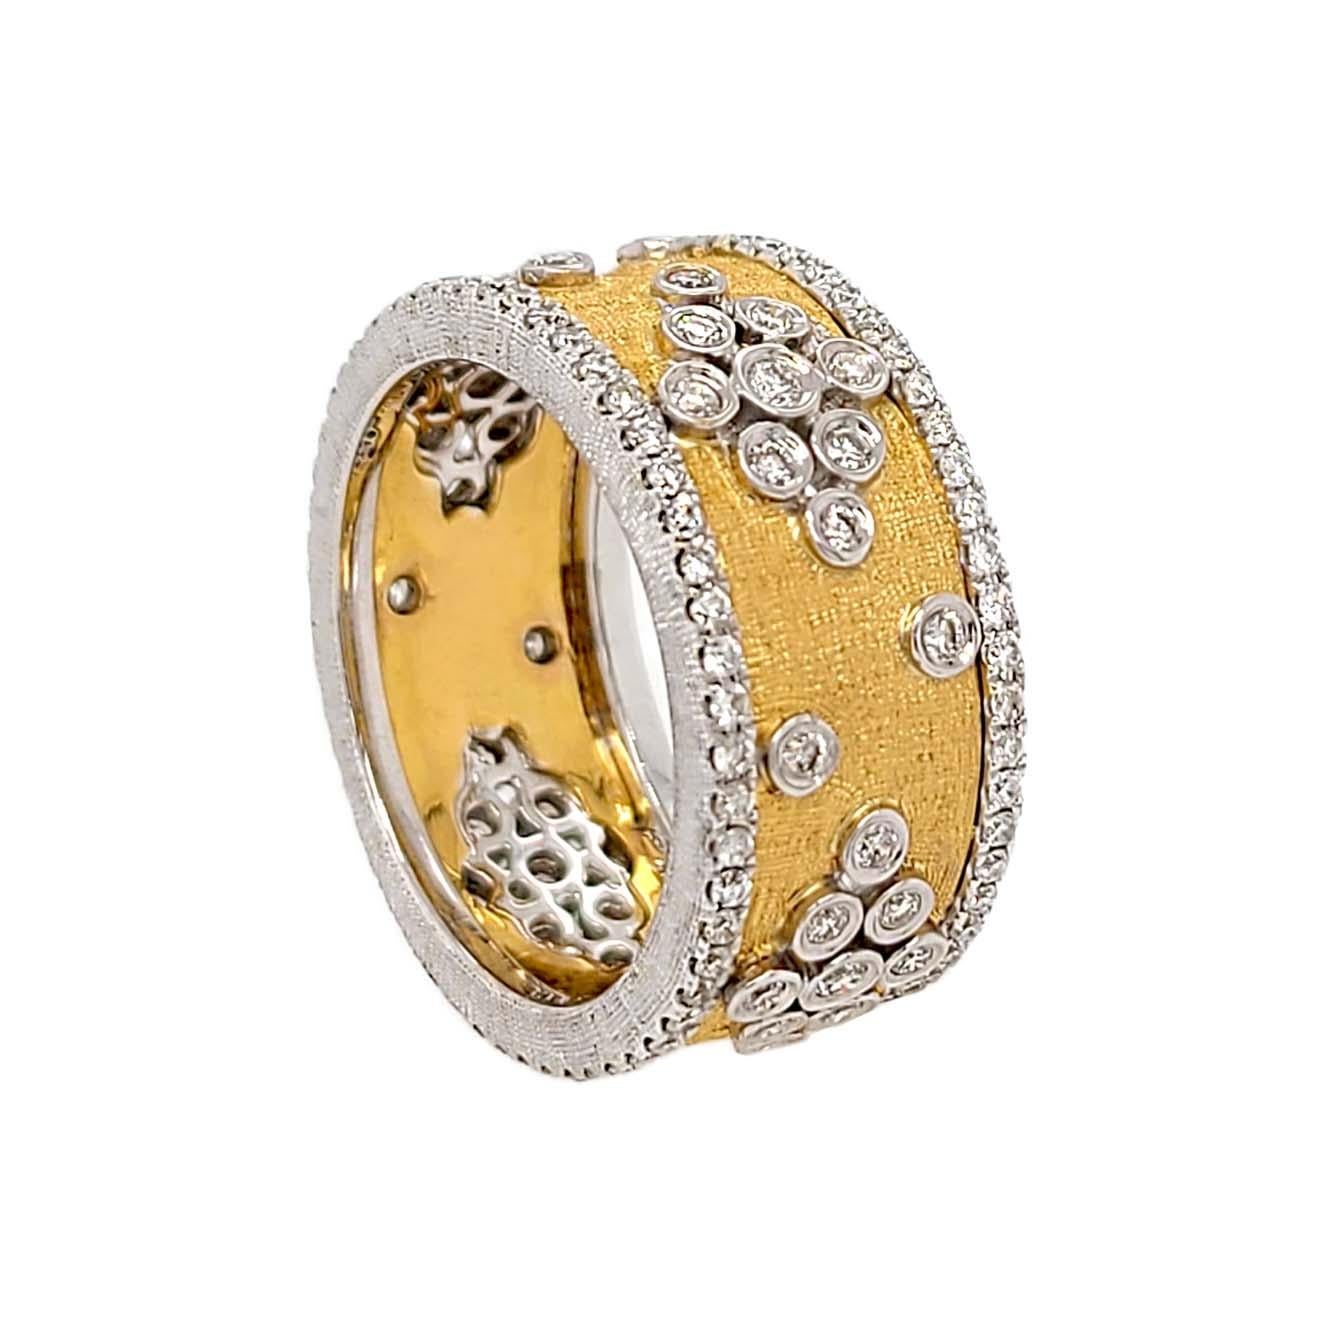 Produced by award winning Italian designer Stefano Vitolo. Stefano creates custom artisanal one of a kind jewelry with excellent gemstones in a truly old world Italian craftmanship.
This handcrafted ring has 1.04 total carat weight of F/G color and